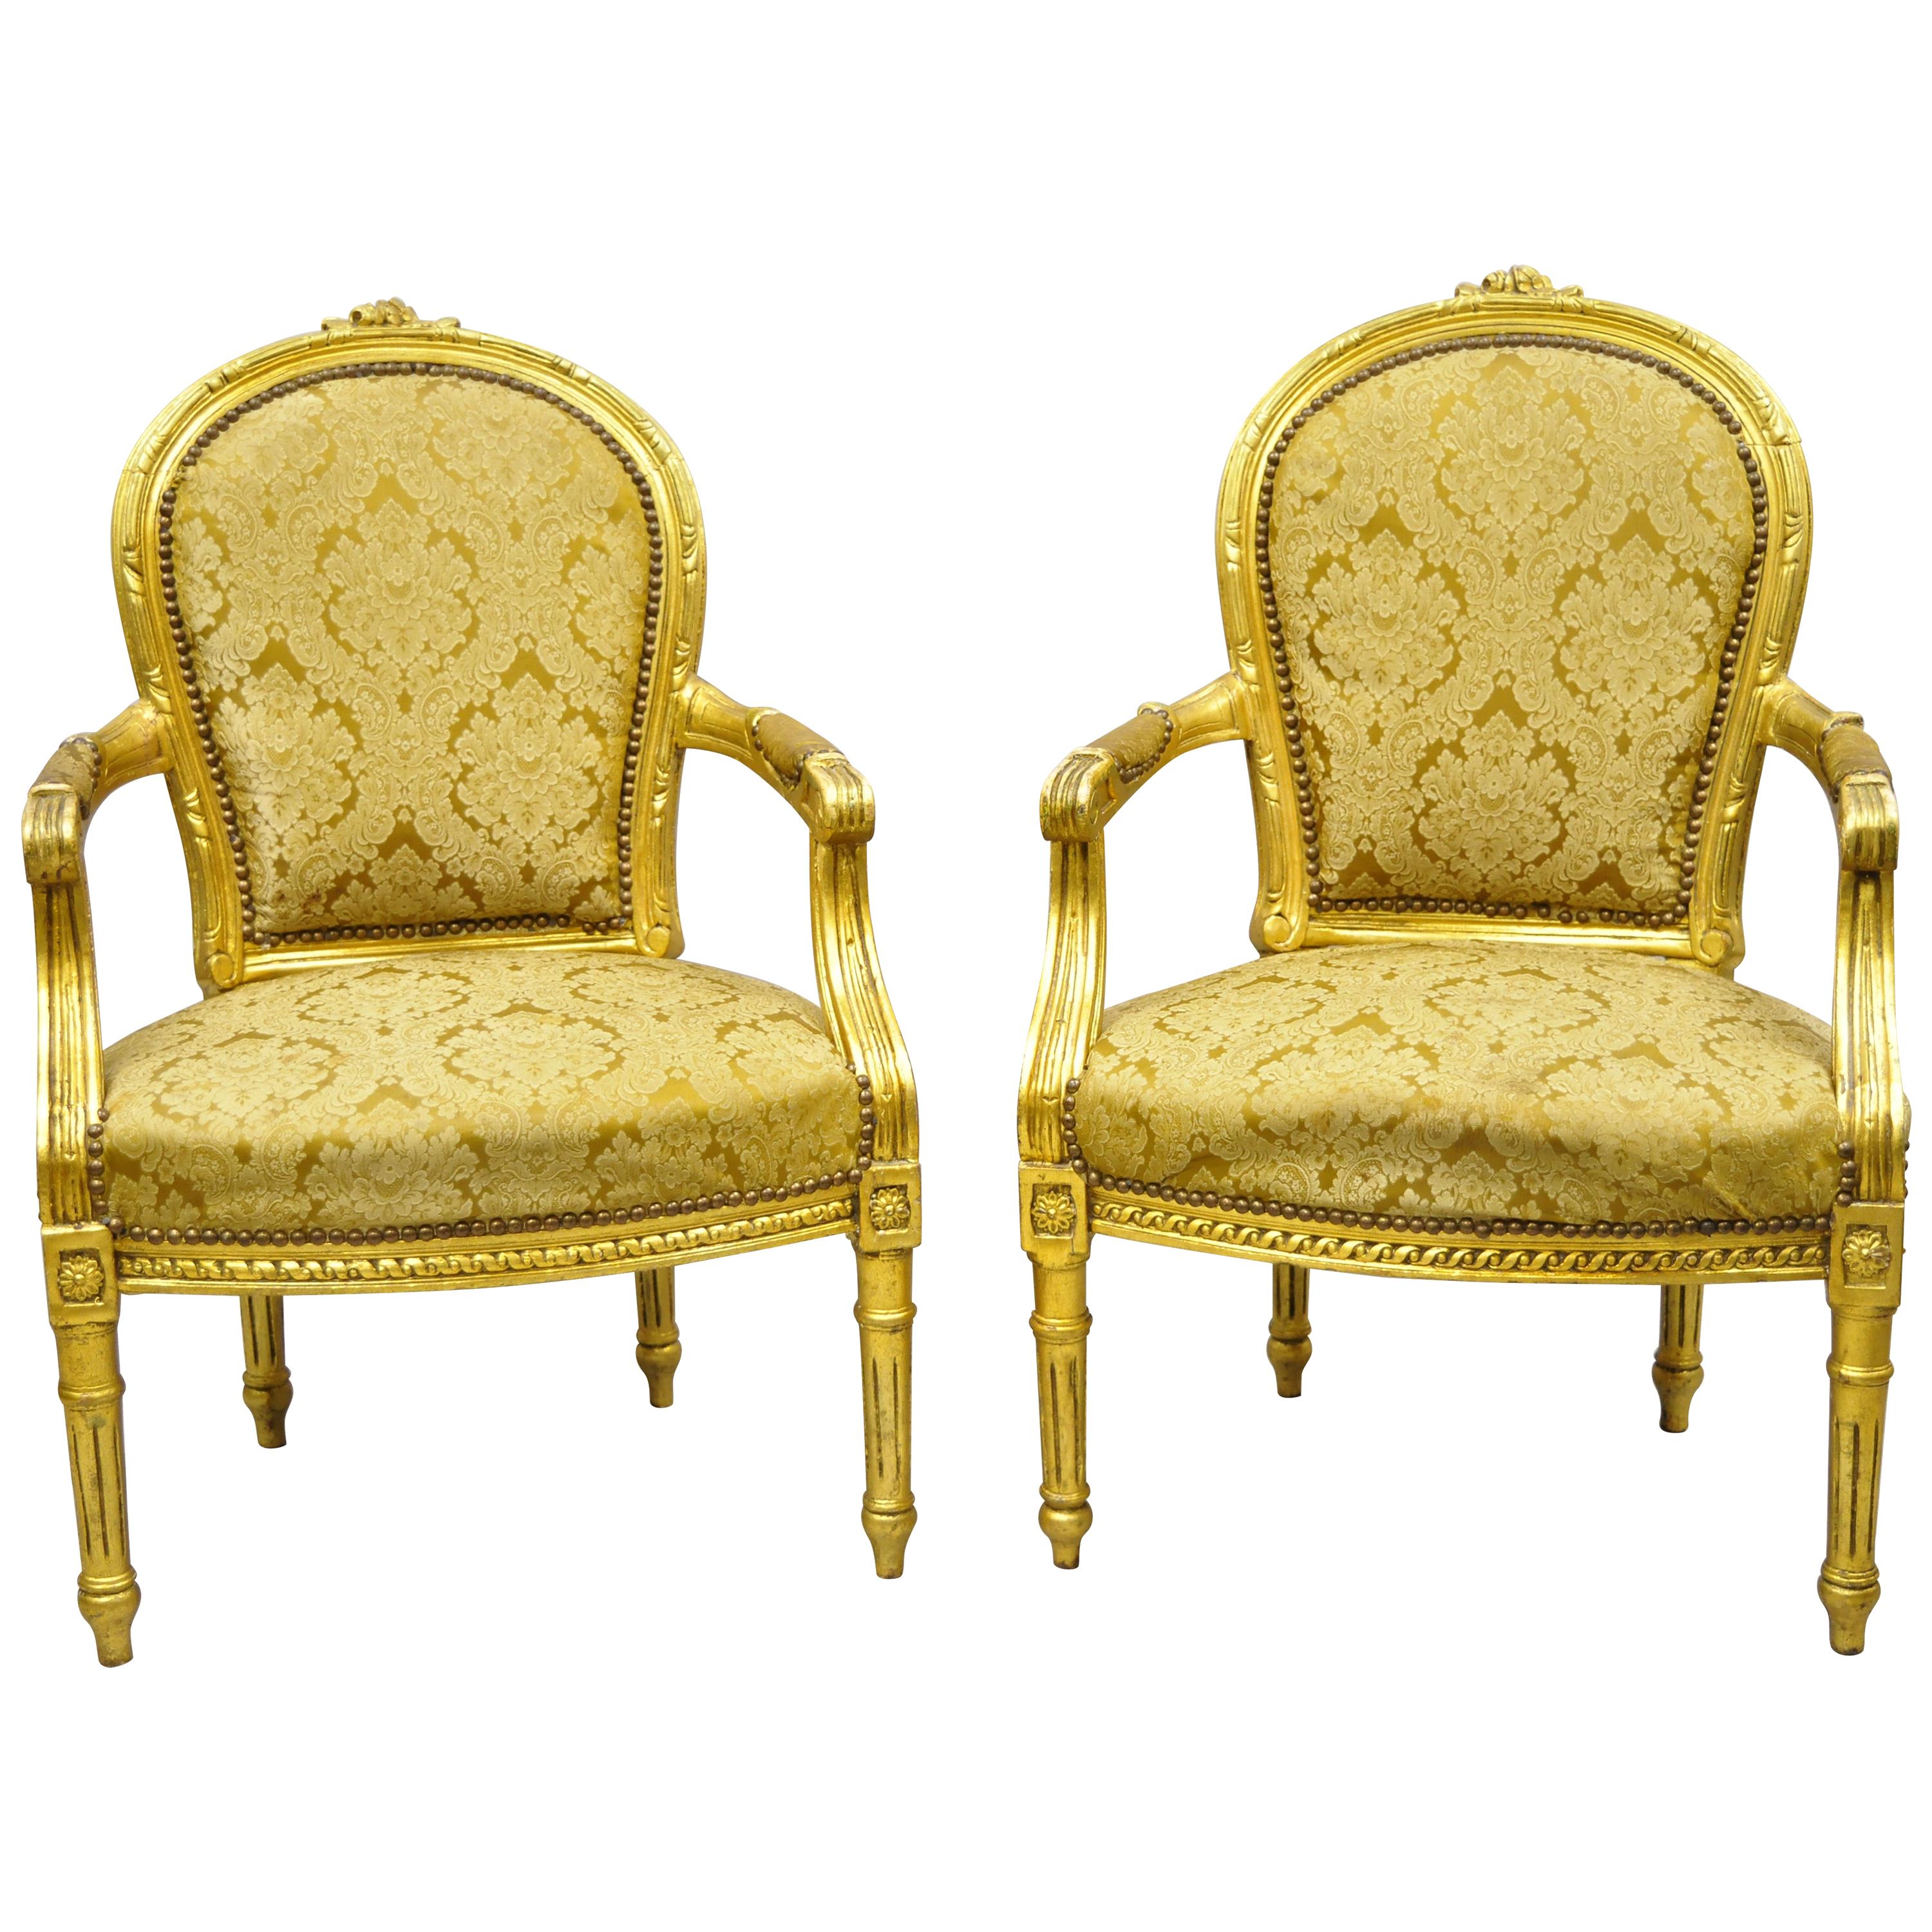 Vintage French Louis XVI Gold Leaf Balloon Back Fauteuil Armchairs, a Pair For Sale